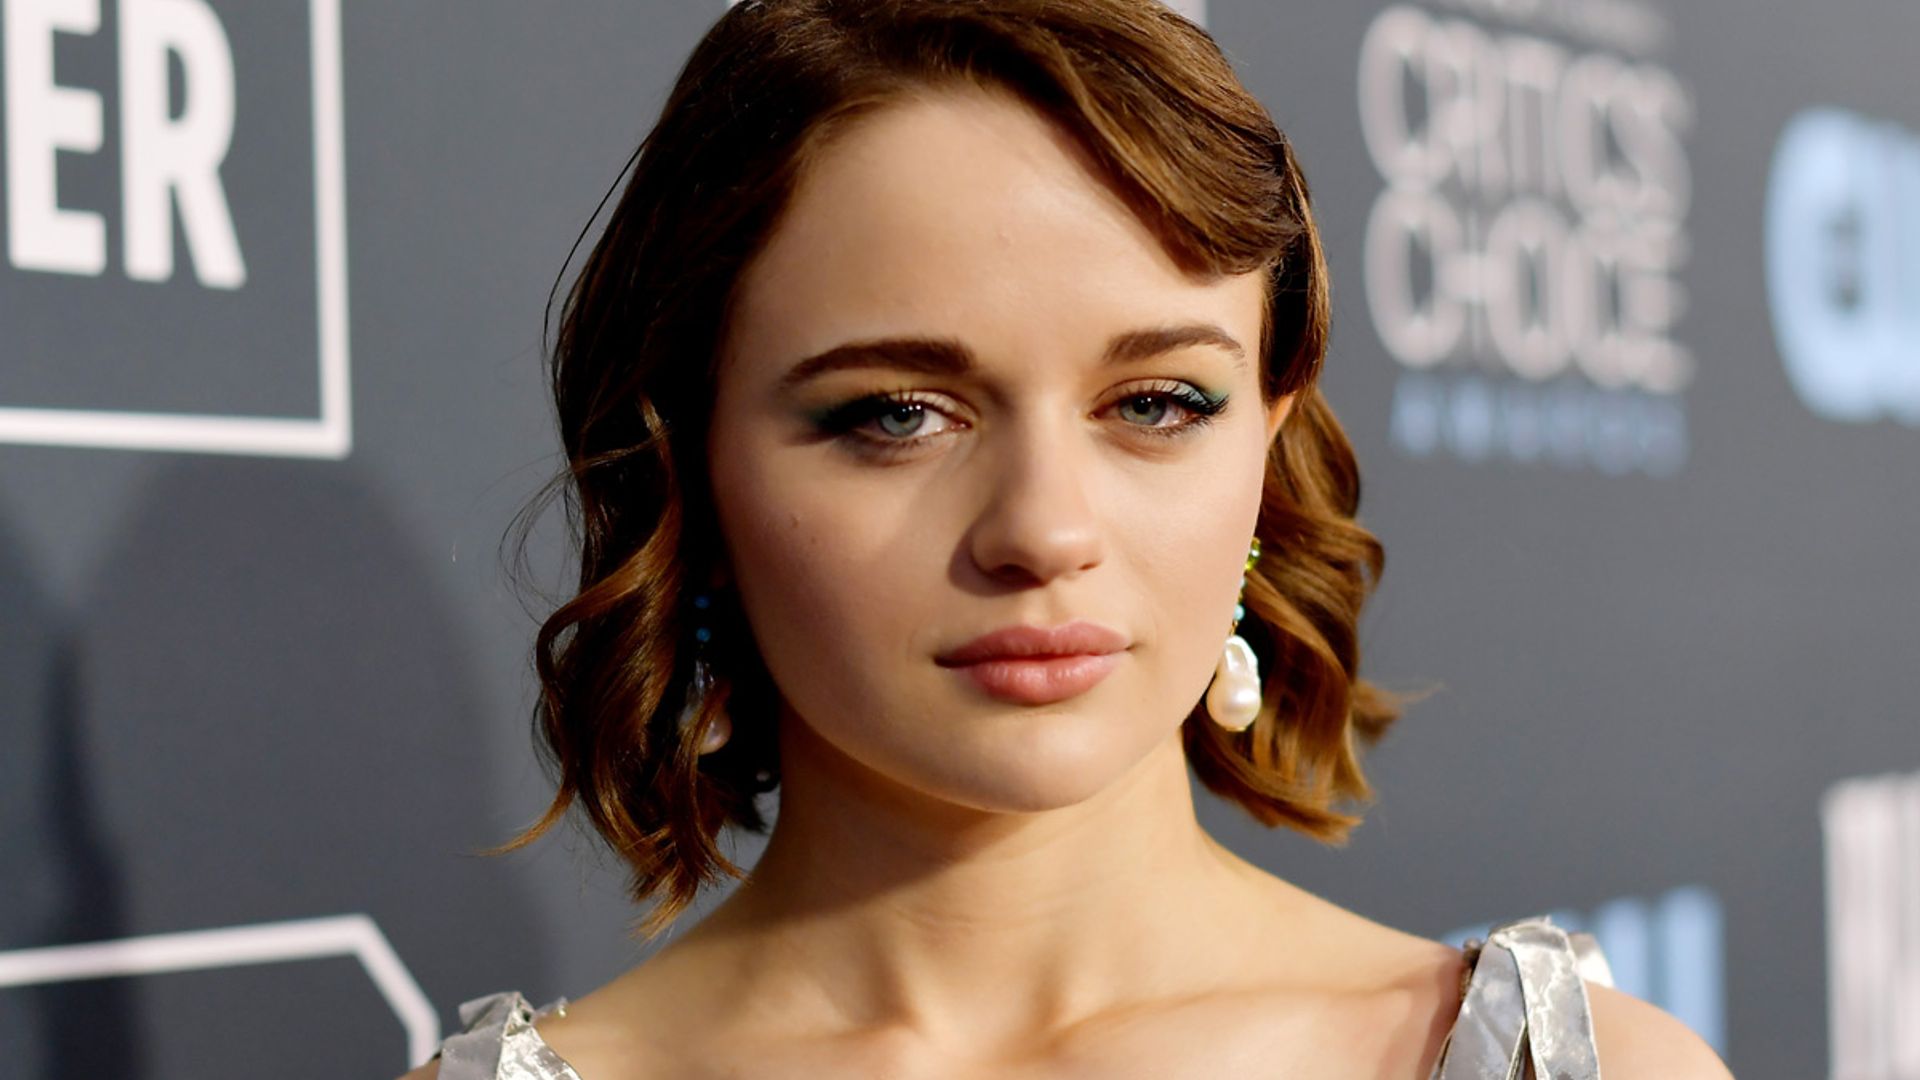 Joey King’s $30k engagement ring is one of the most unique rocks we’ve ever seen